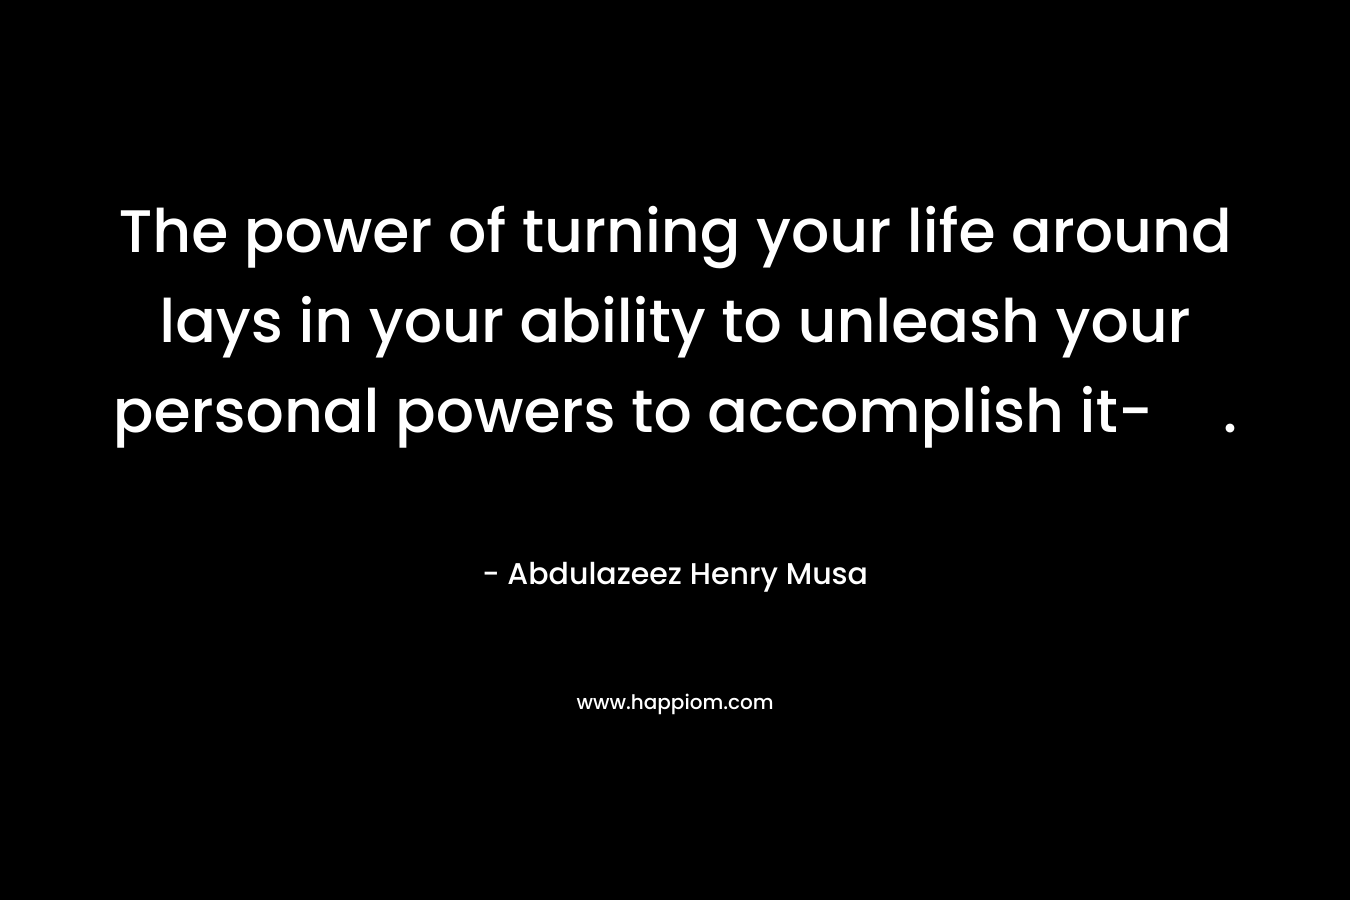 The power of turning your life around lays in your ability to unleash your personal powers to accomplish it-.